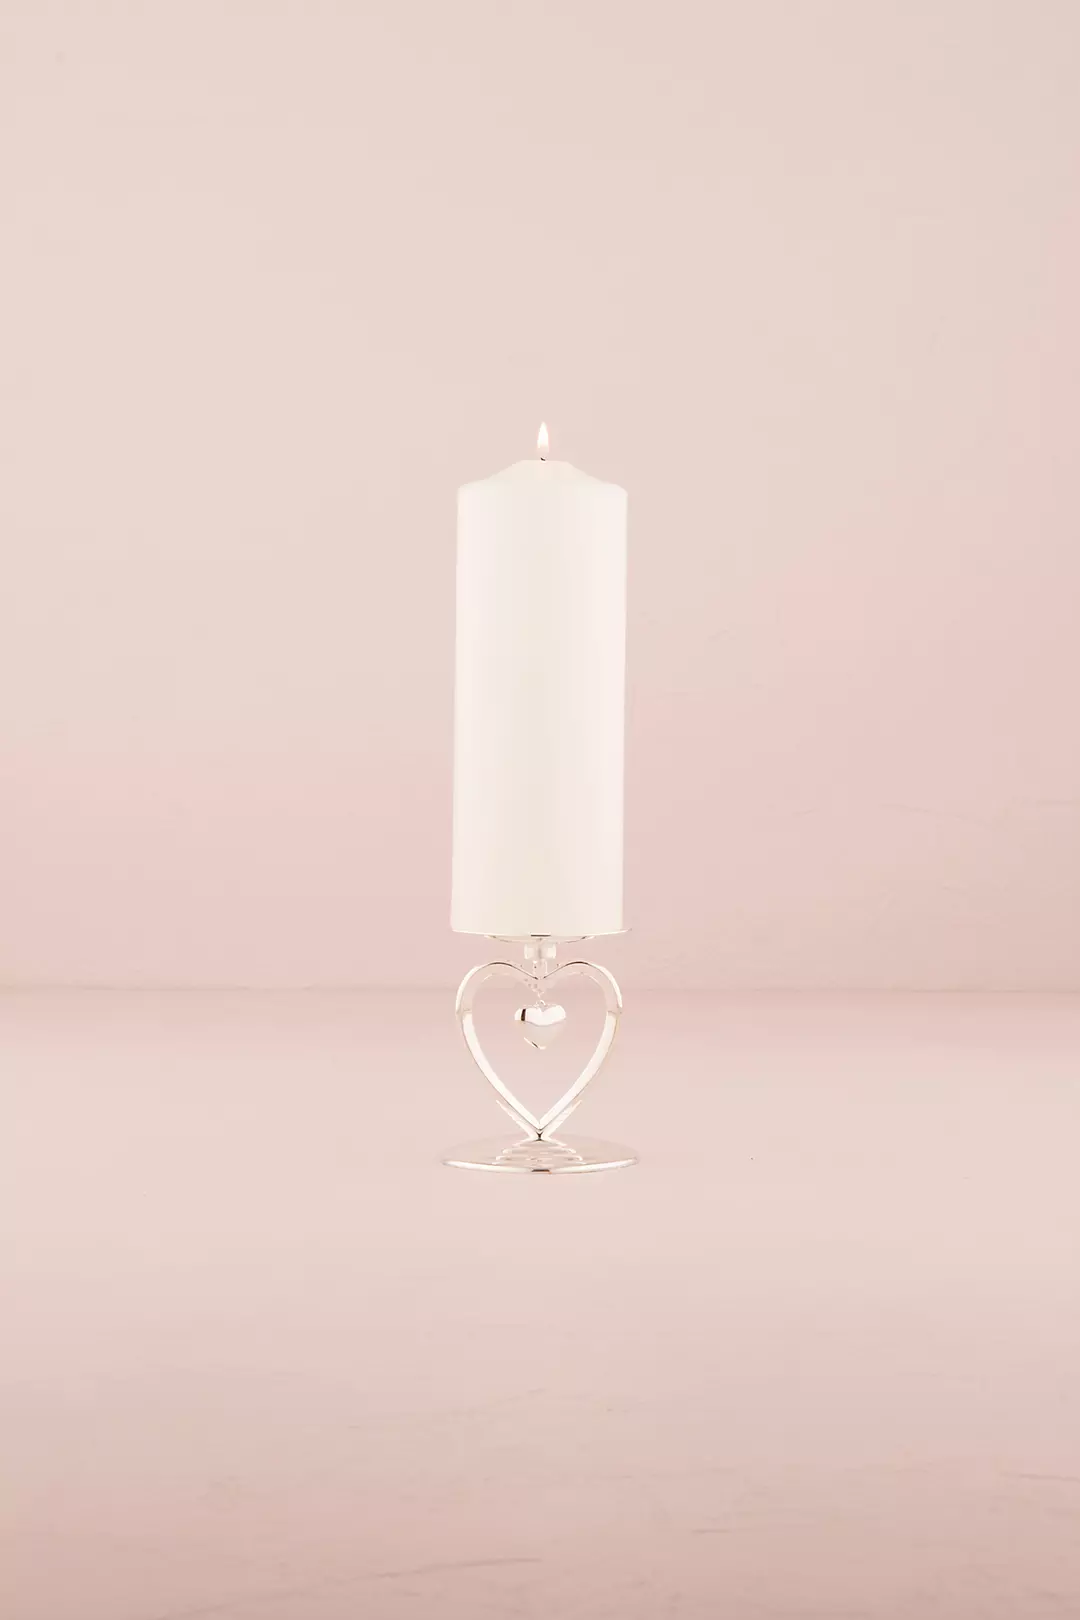 Suspended Heart Unity Candle Holder Image